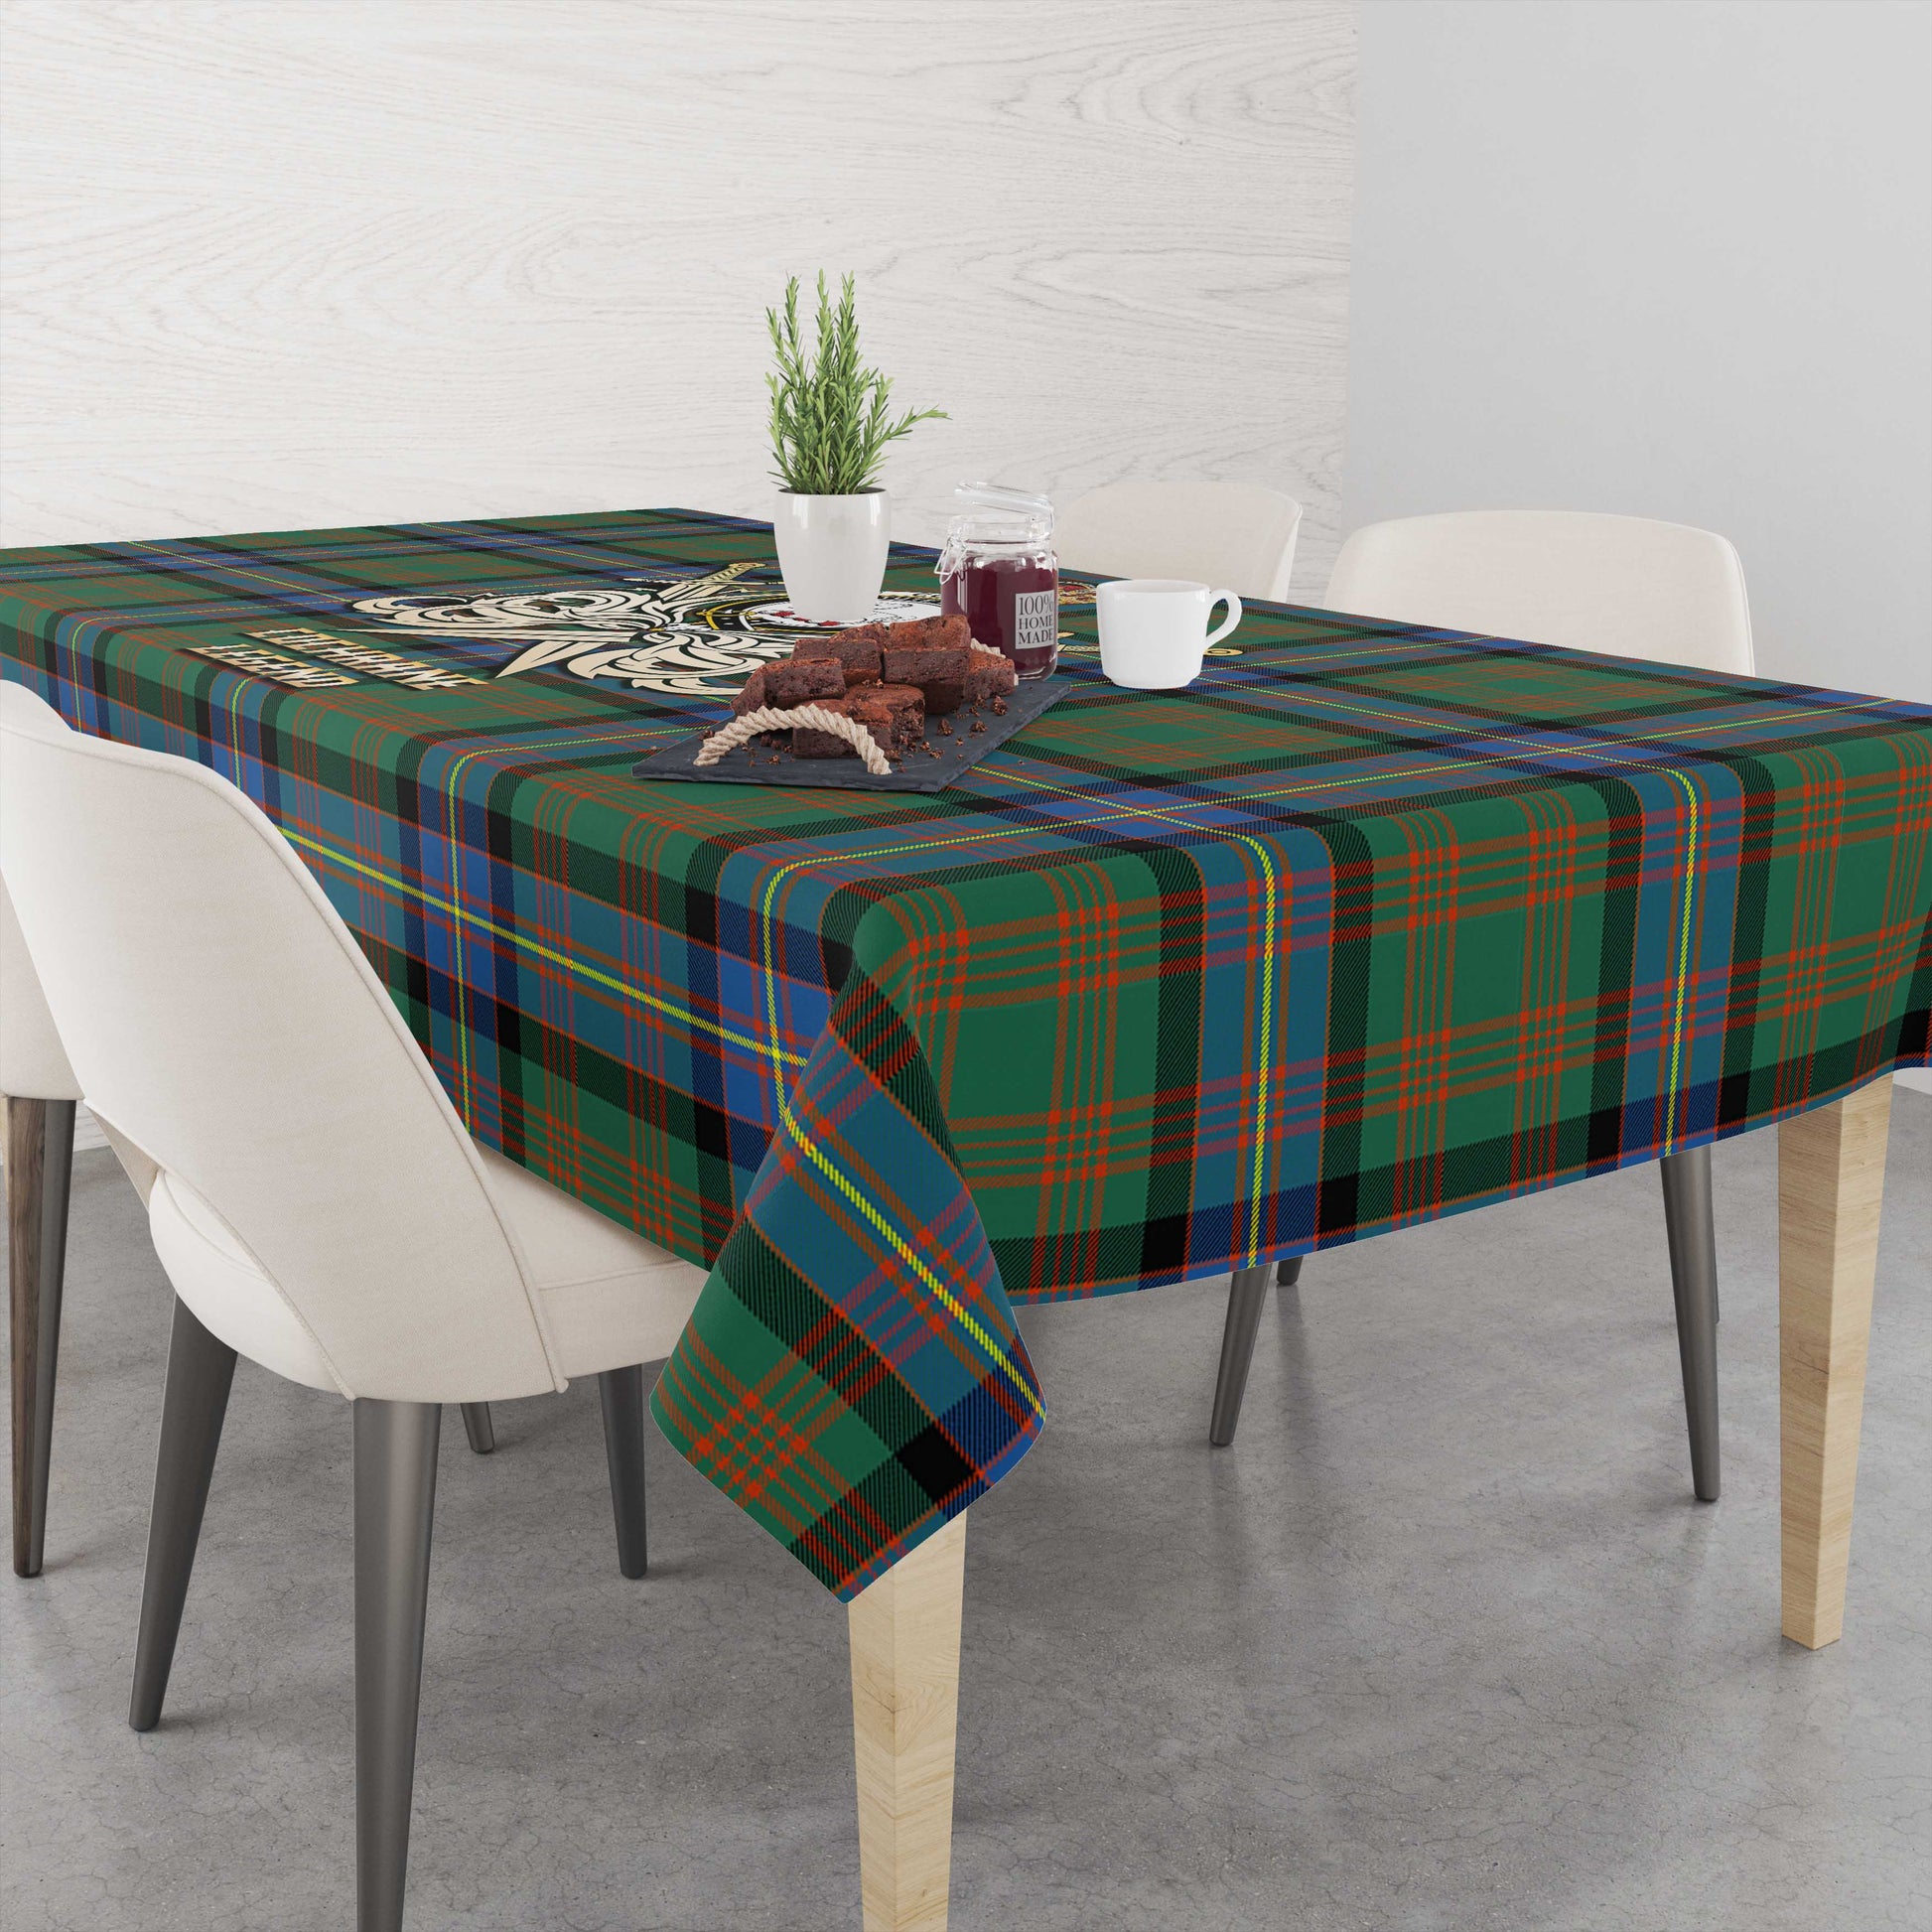 Tartan Vibes Clothing Cochrane Ancient Tartan Tablecloth with Clan Crest and the Golden Sword of Courageous Legacy